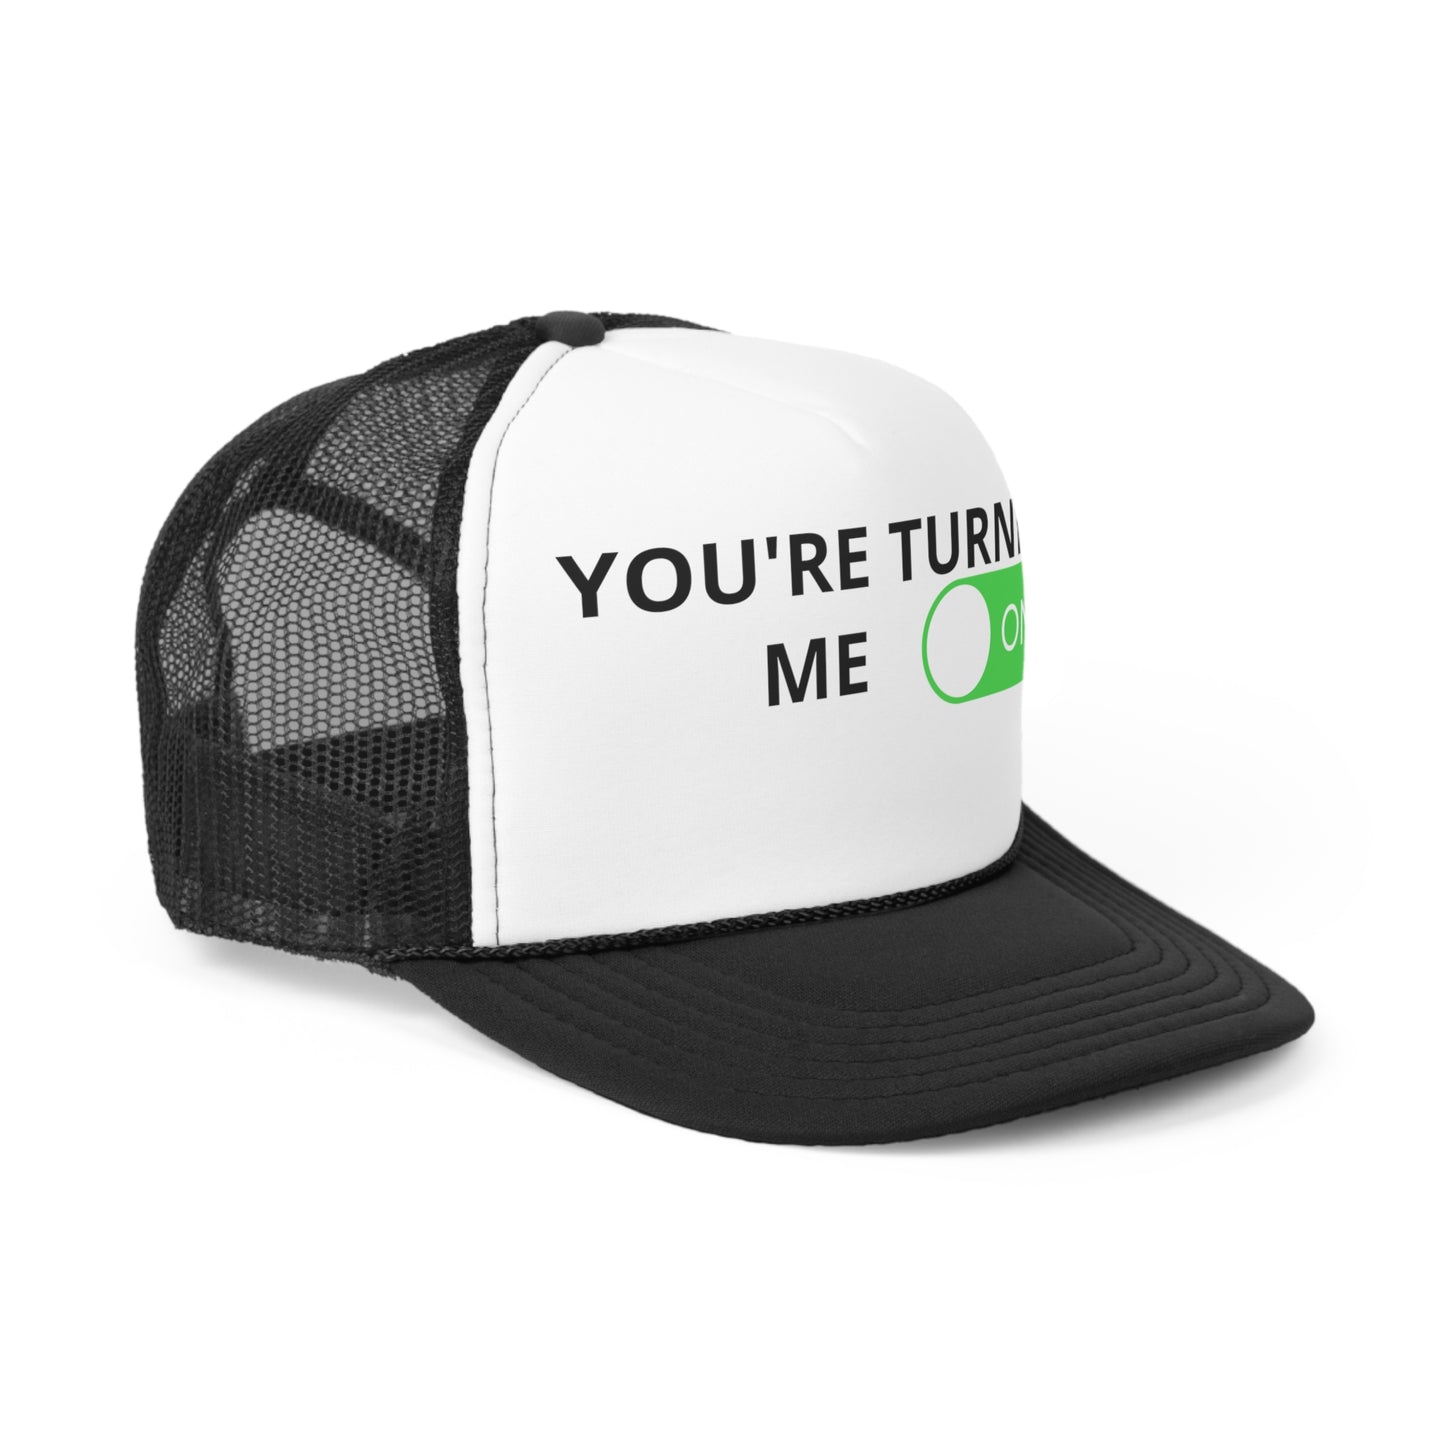 You are turning me on Trucker Cap